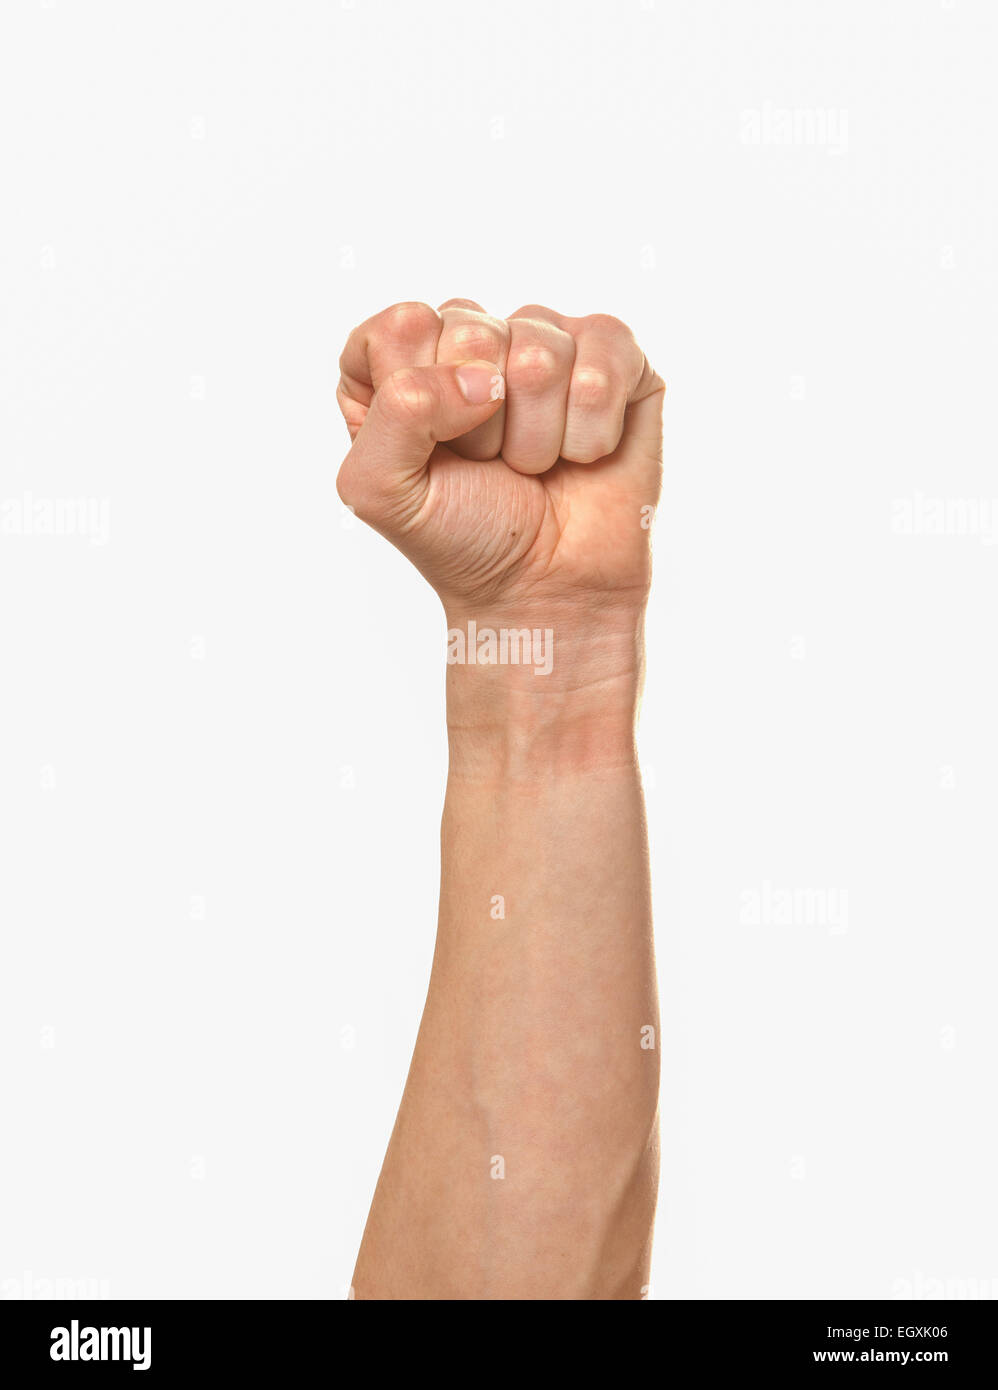 An arm extended with a clenched fist. Stock Photo